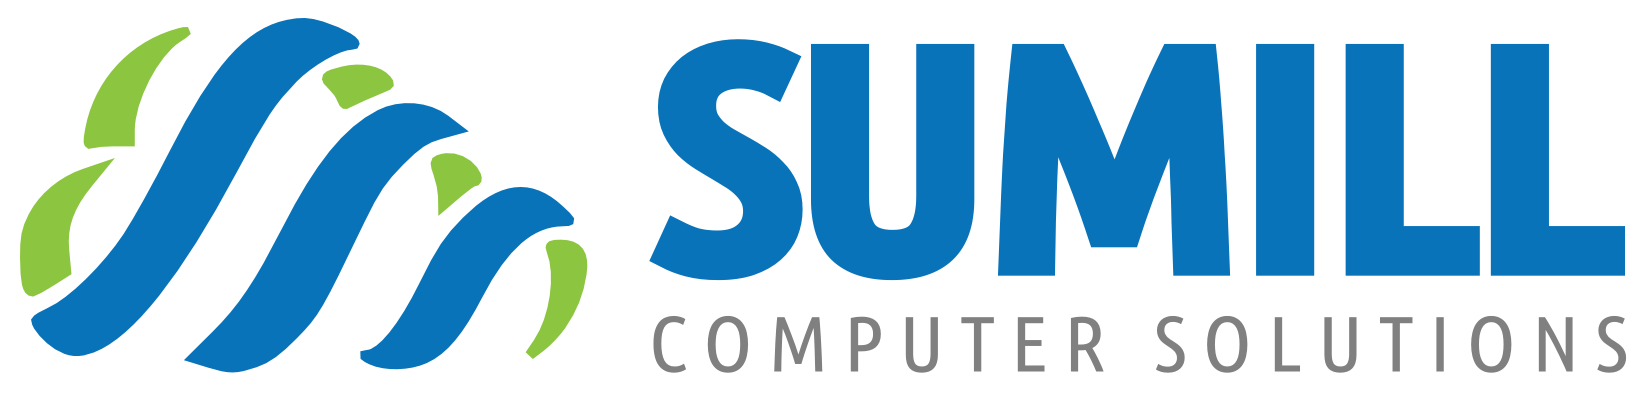 SUMILL COMPUTER SOLUTIONS INC.